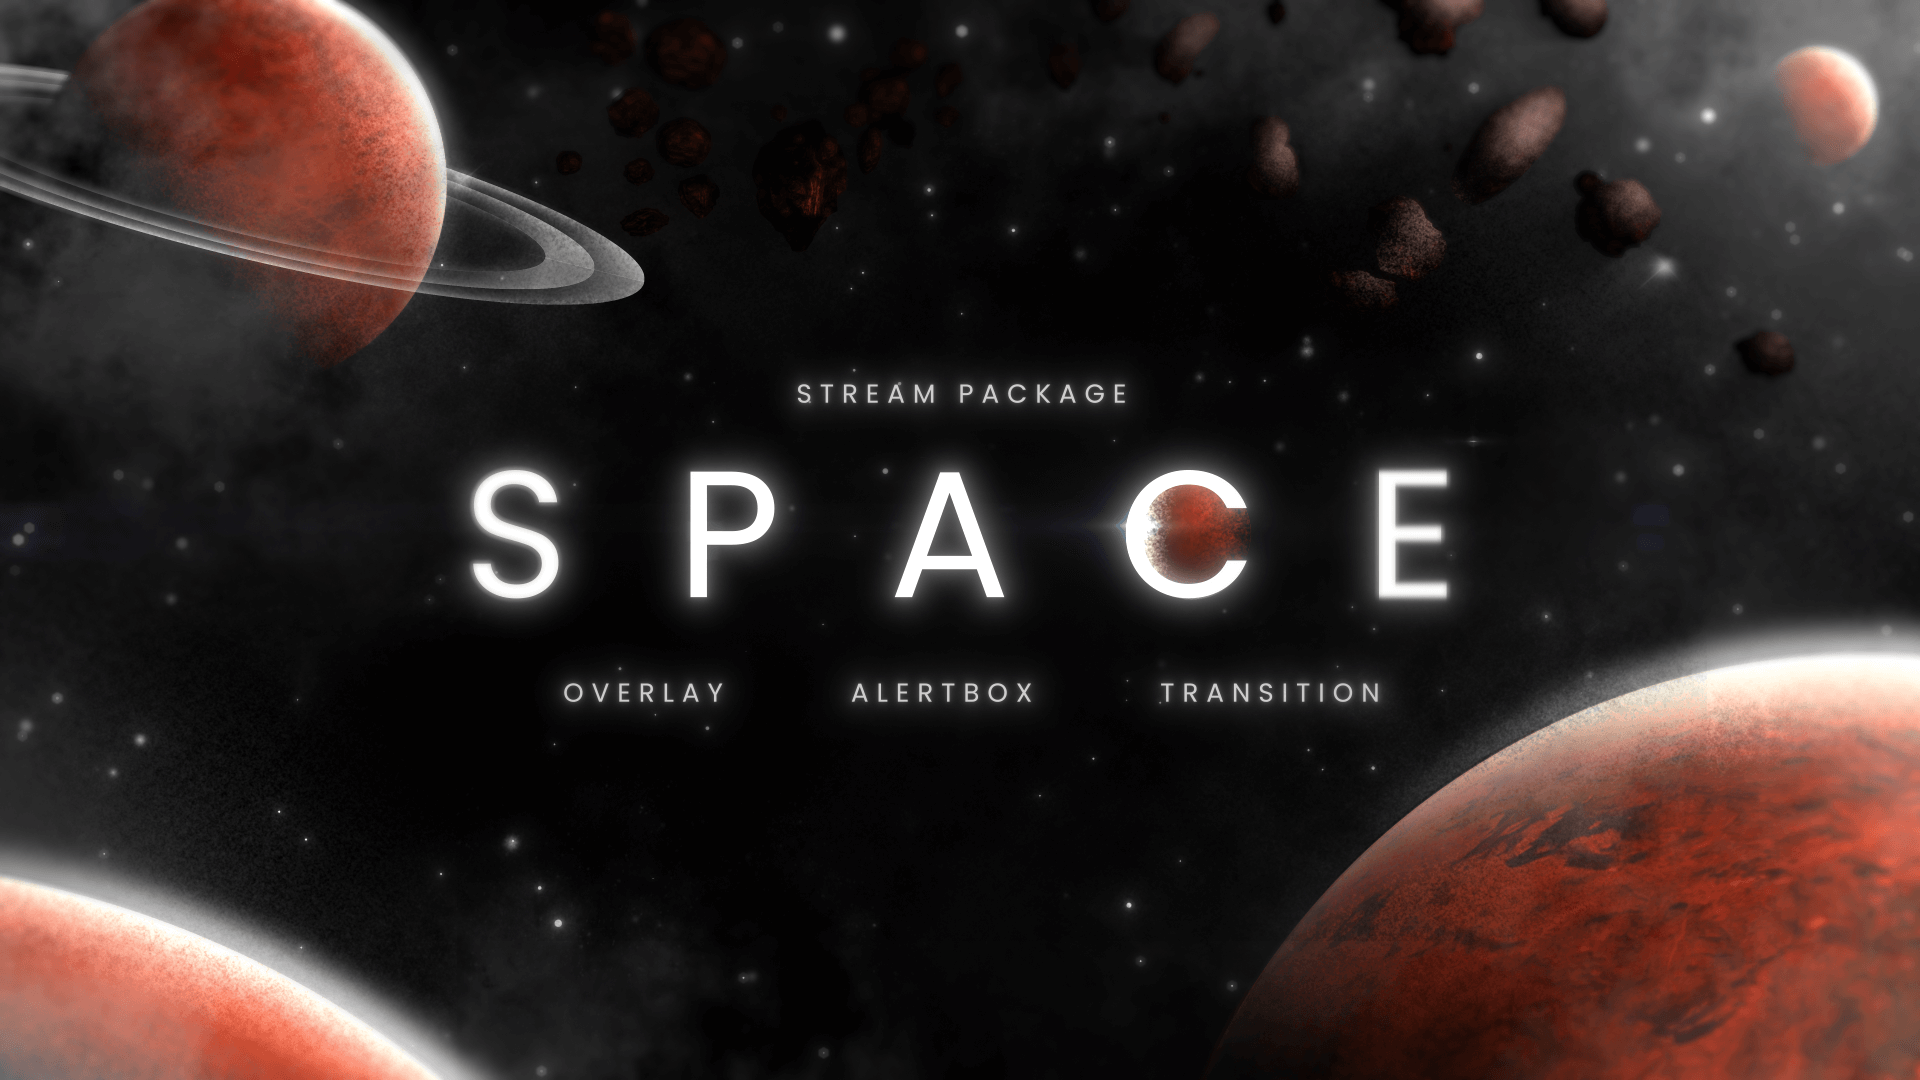 Space Animated Stream Package with Overlays, Alerts and Transition for Twitch and OBS Studio